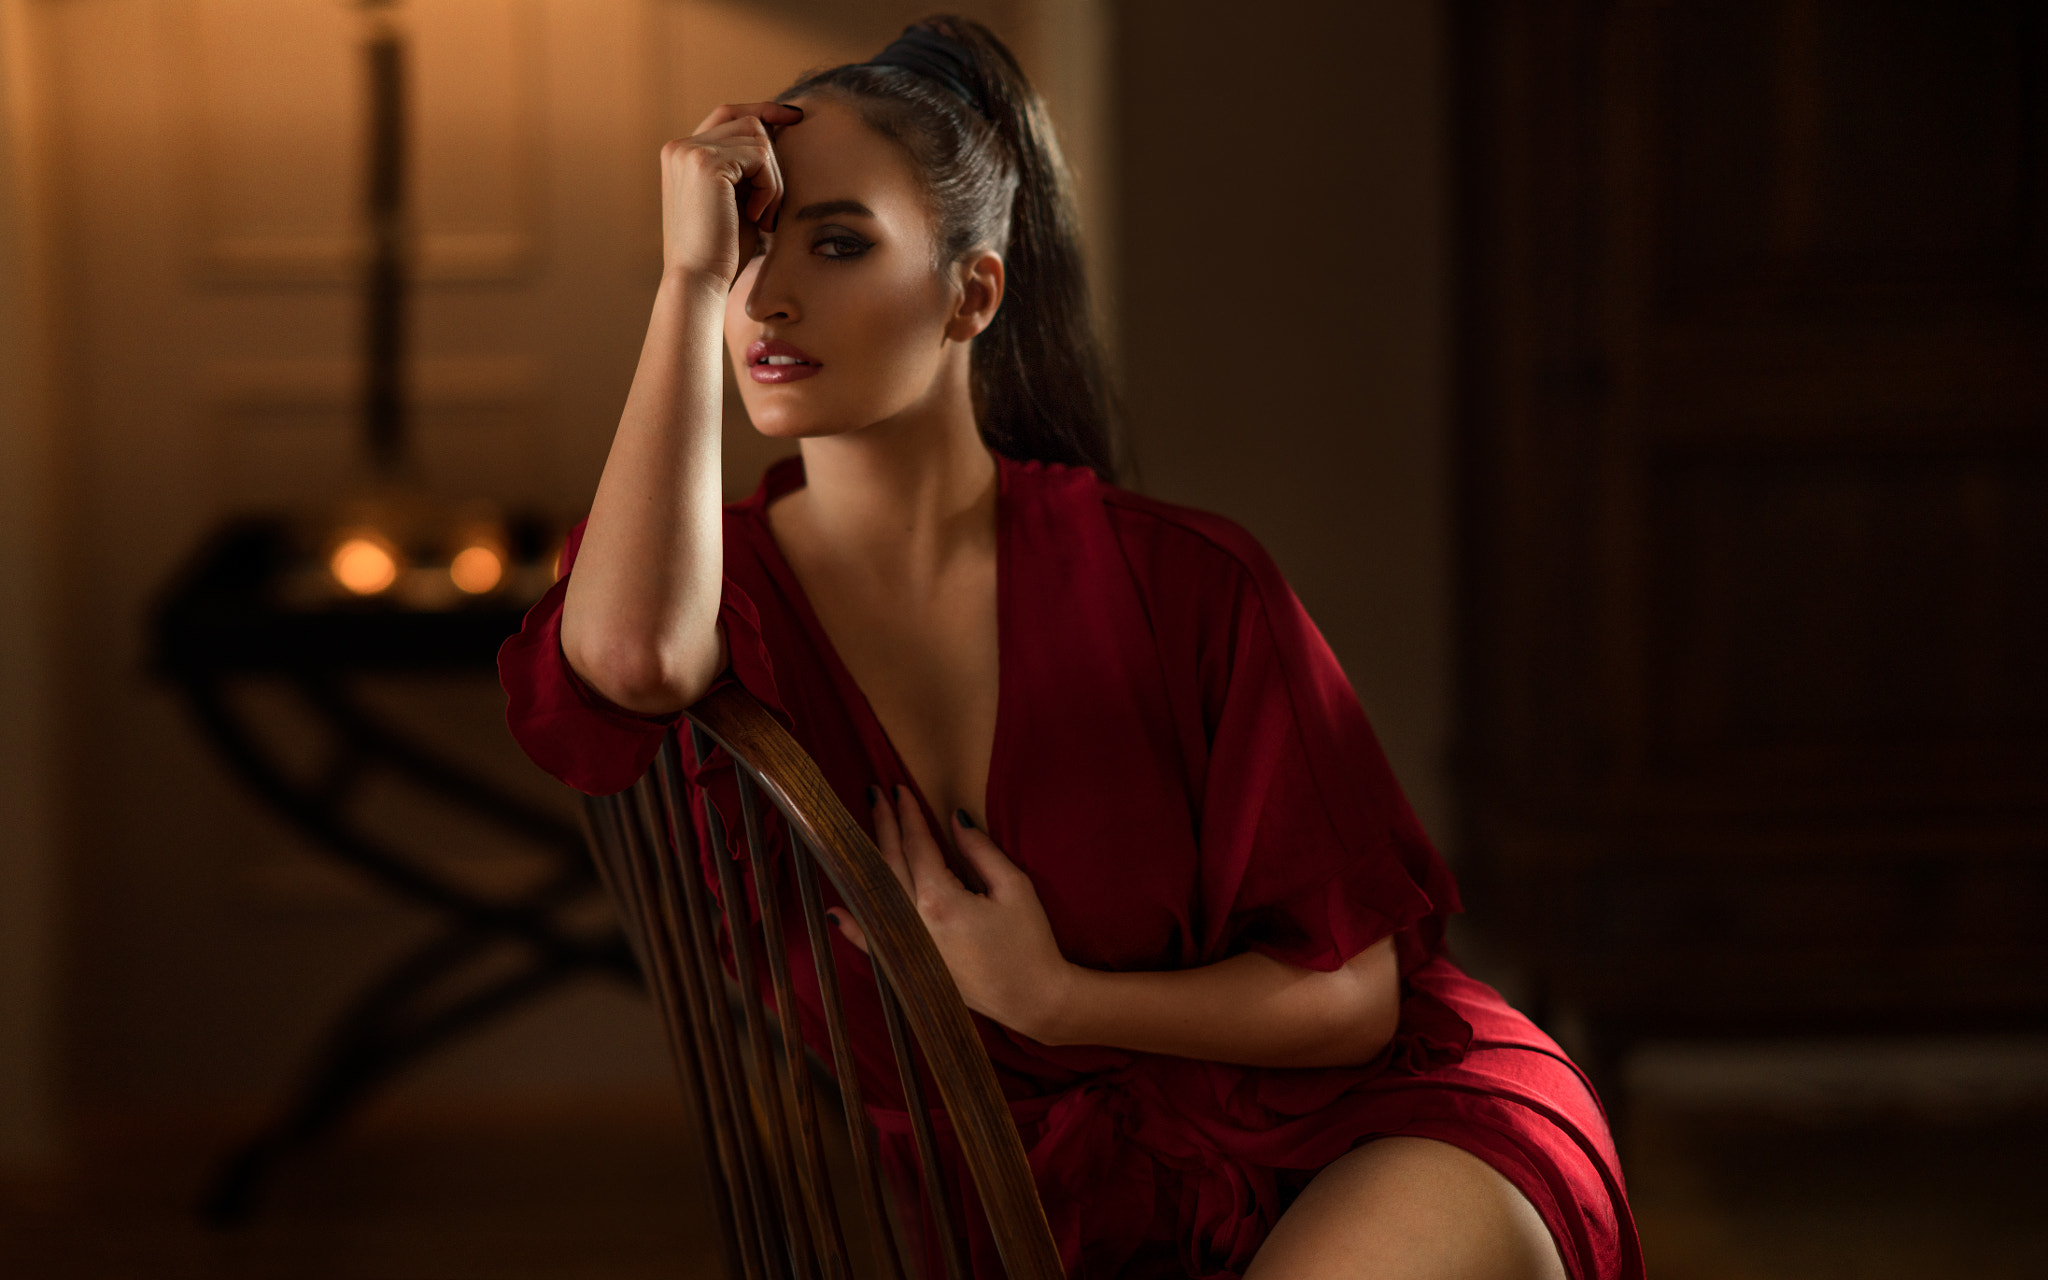 Women Portrait Sitting Depth Of Field Black Nails Red Lipstick Chair Ponytail Red Clothing Looking A 2048x1280